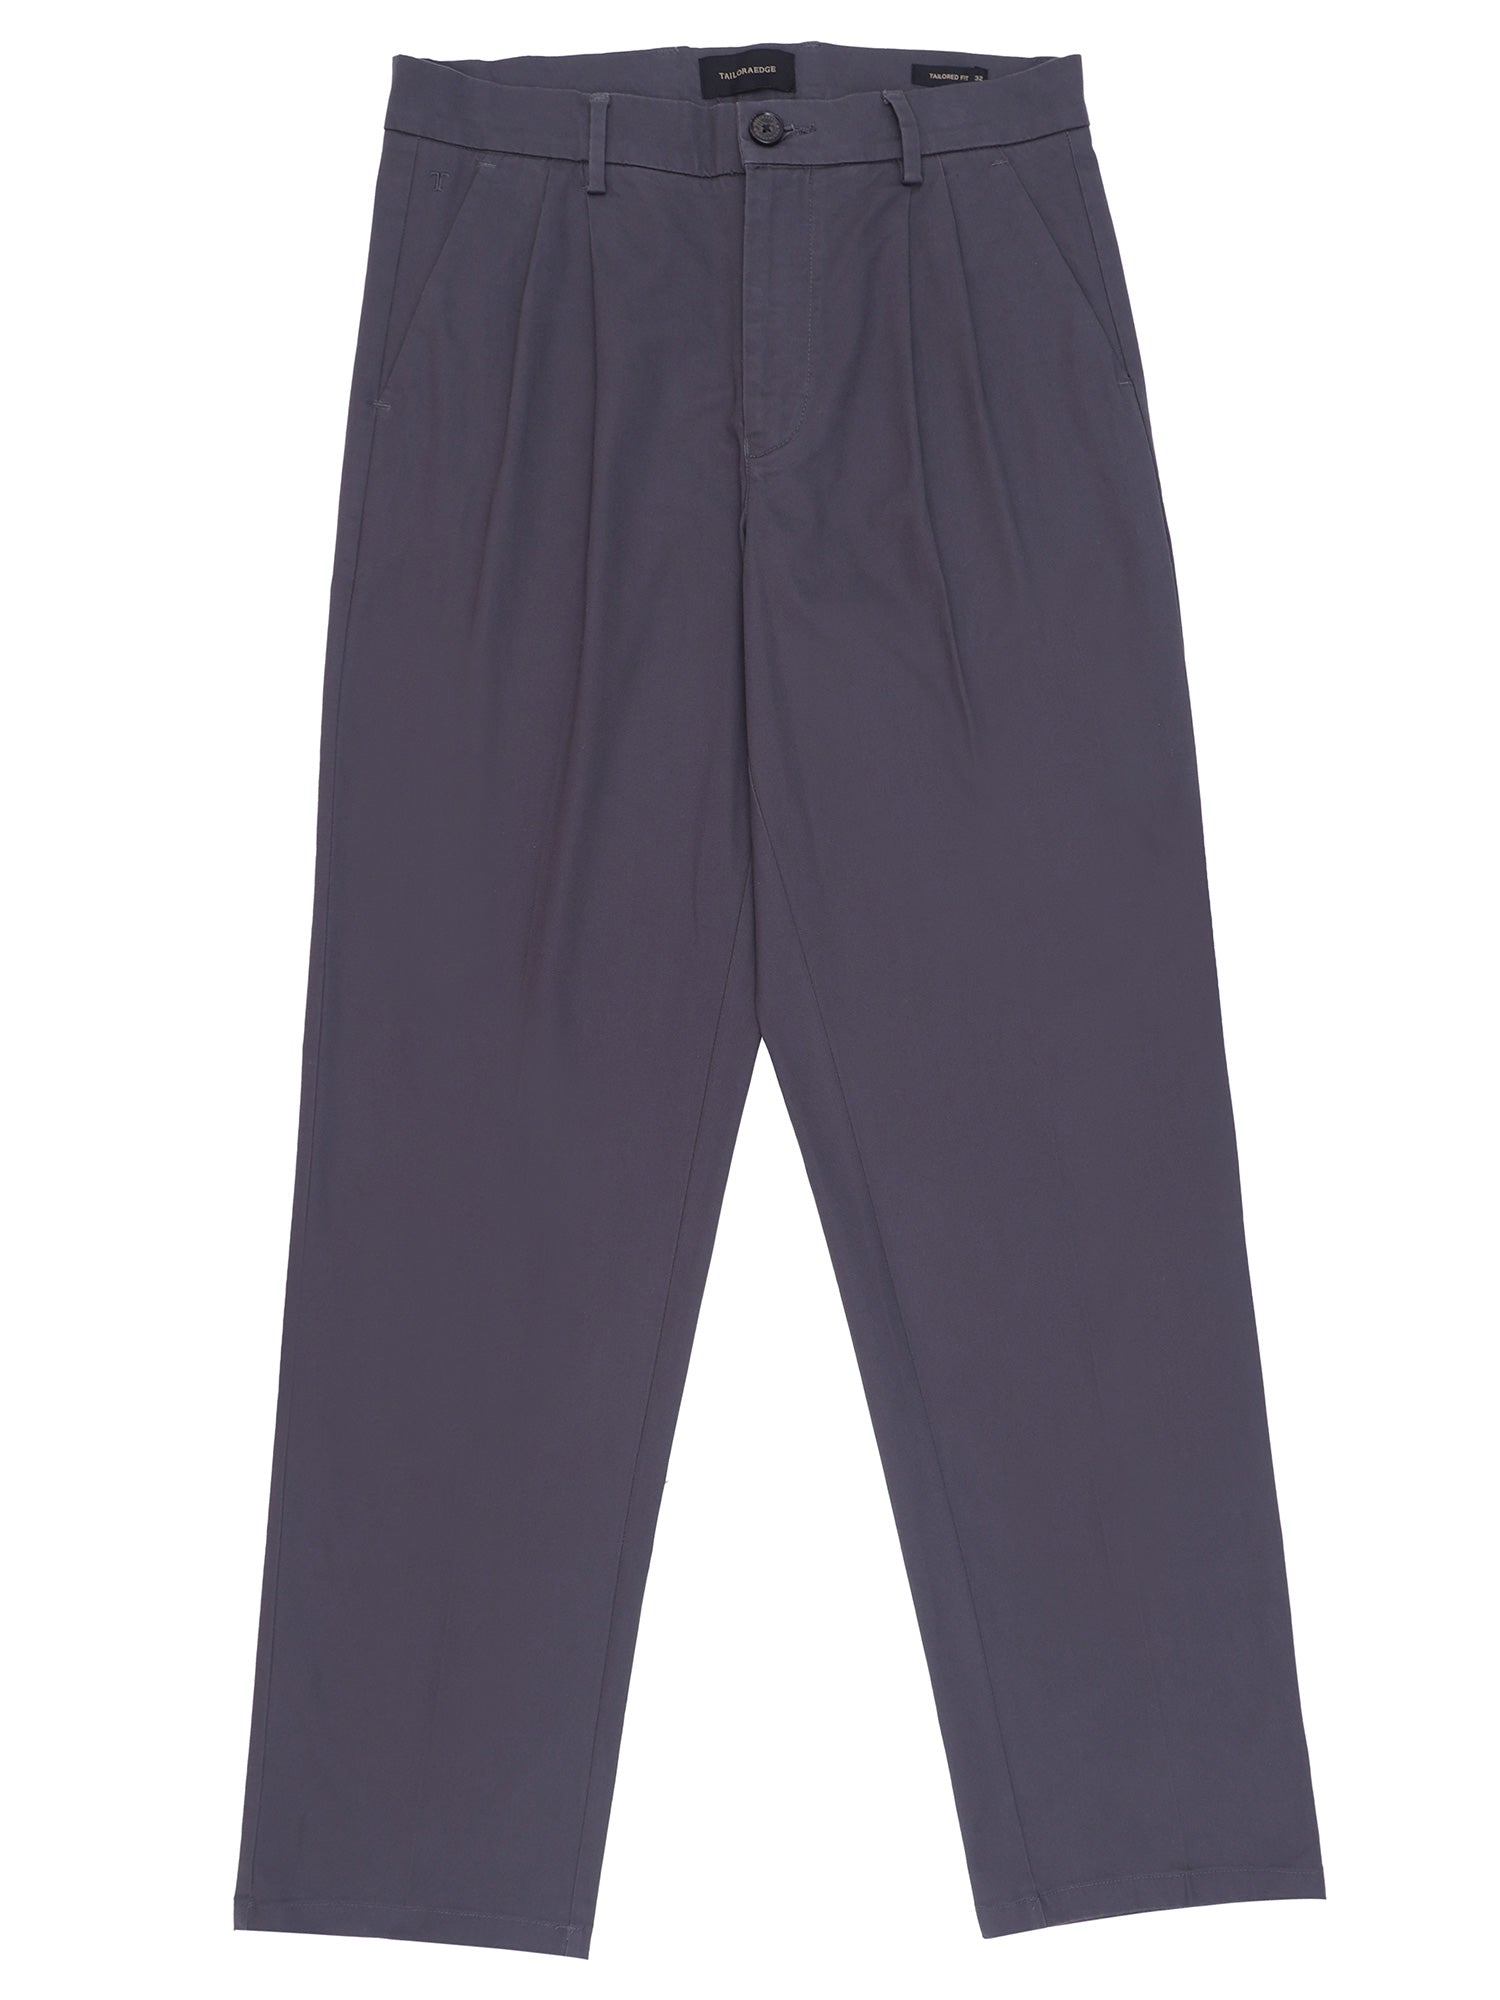 Duca Double Pleated Dark Grey Relaxed Pant